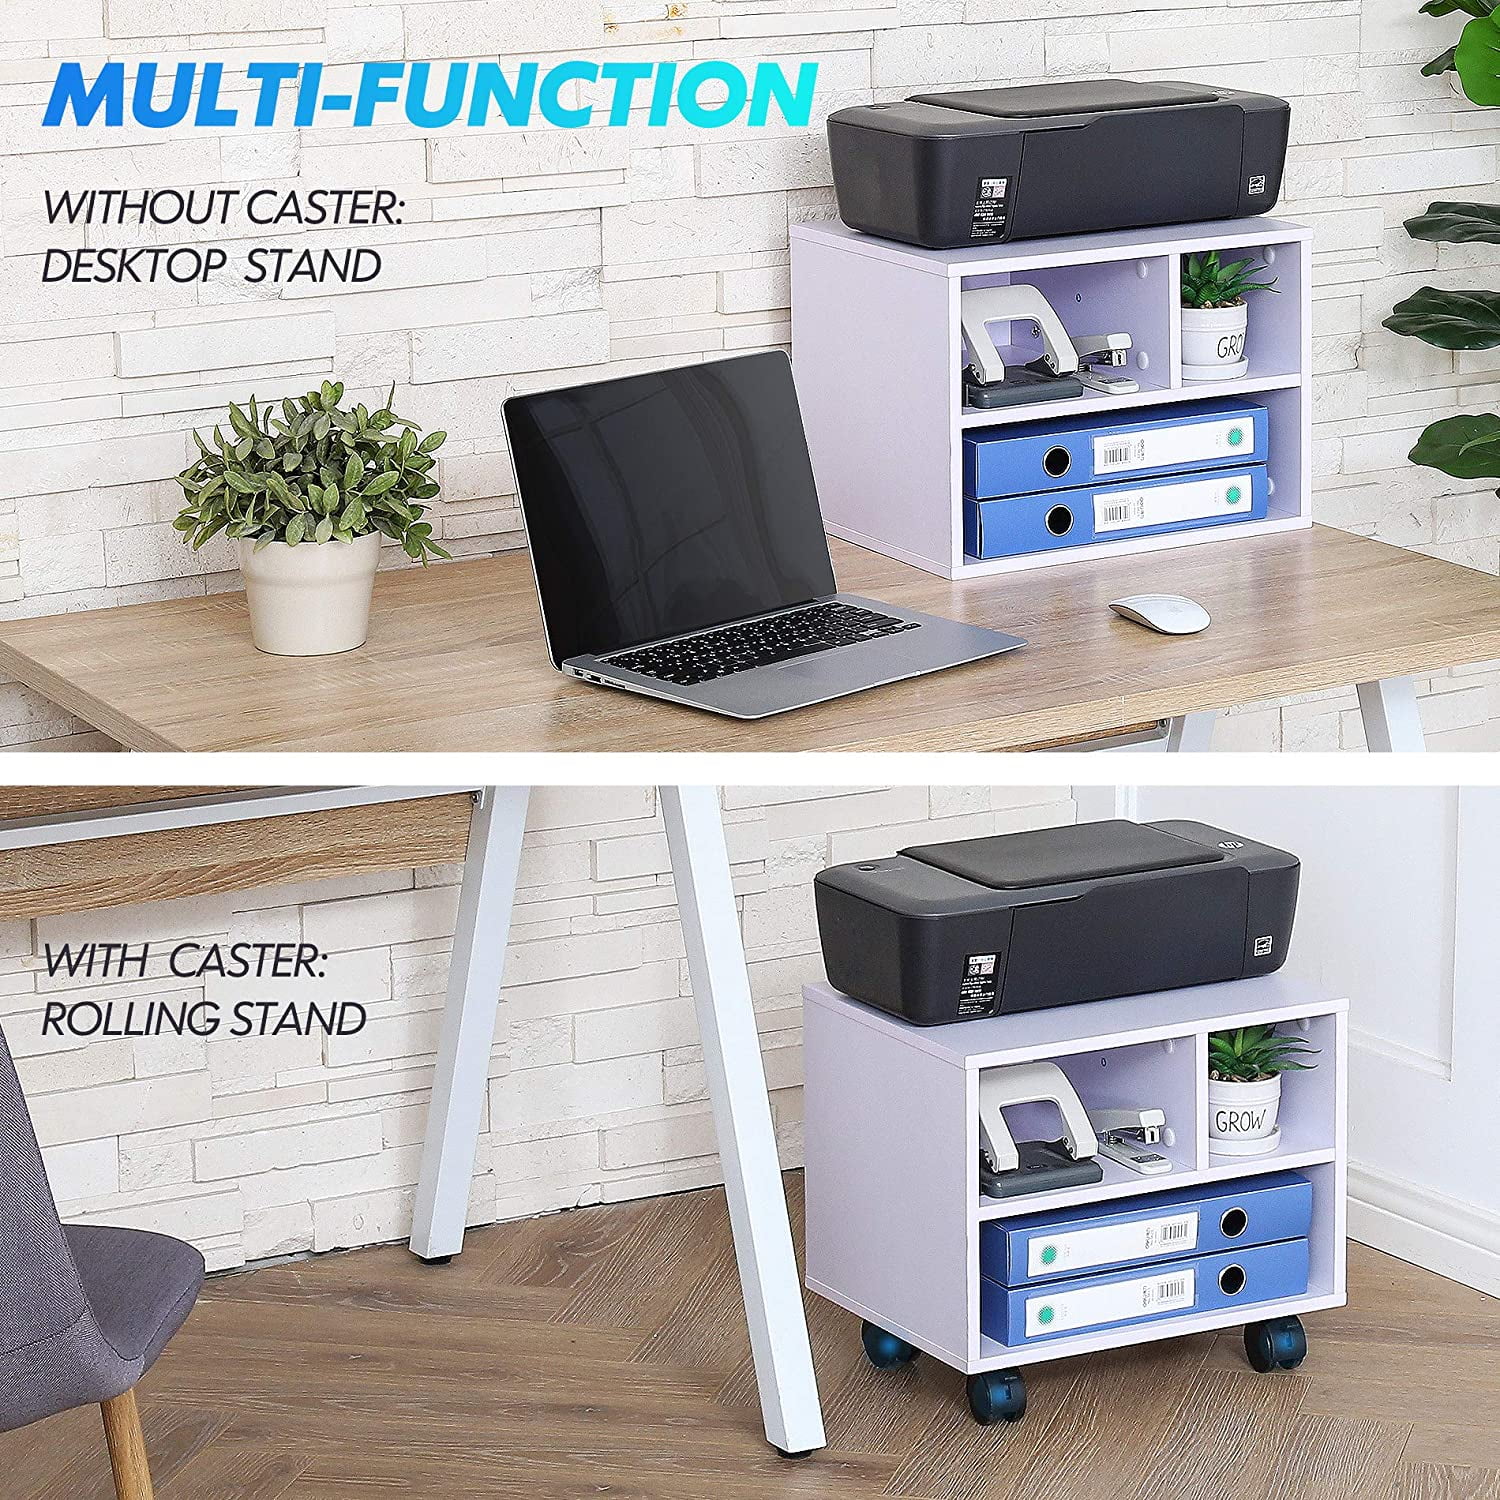 FITUEYES Printer Stand Wood White Desk Side Mobile 3 Storage with Wheels 40x30x35cm PS304005WW 